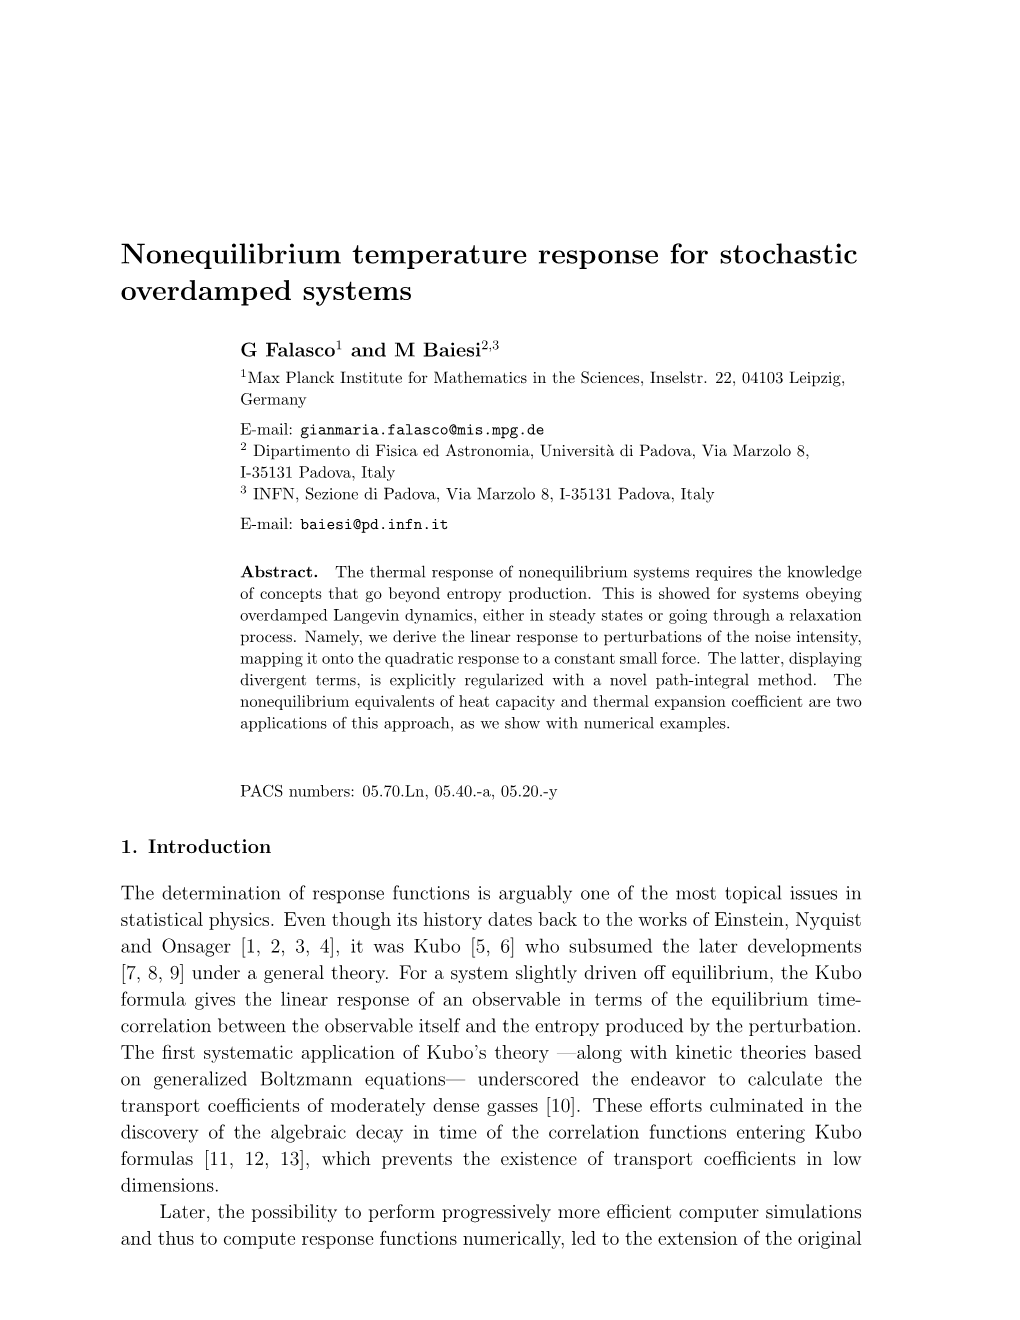 Nonequilibrium Temperature Response for Stochastic Overdamped Systems